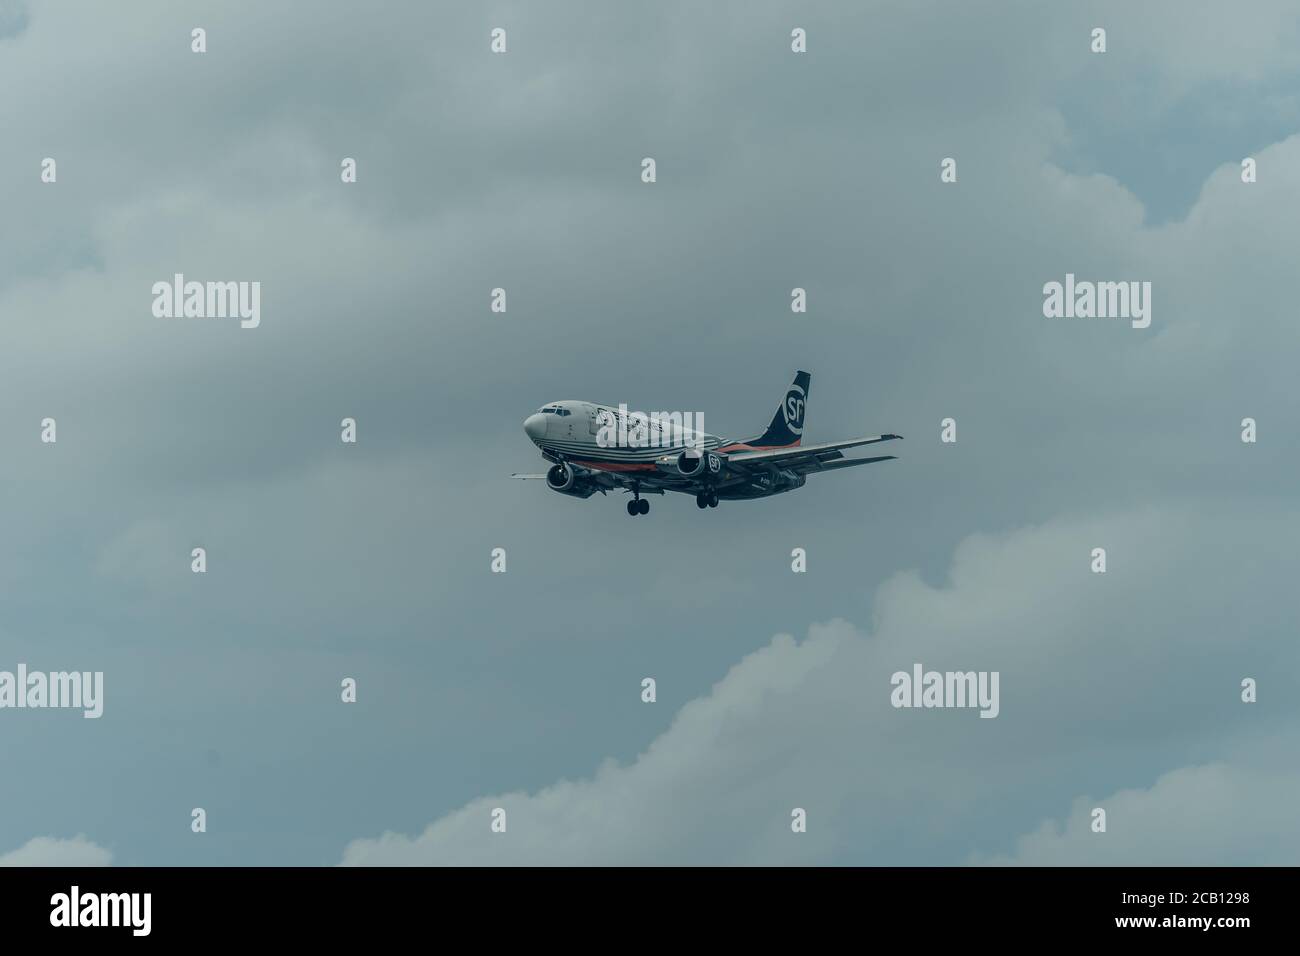 Ho Chi Minh city, Vietnam - 6 Aug, 2020: SF Airlines Boeing 757-200F airplane fly over urban areas preparing landing into Tan Son Nhat International A Stock Photo